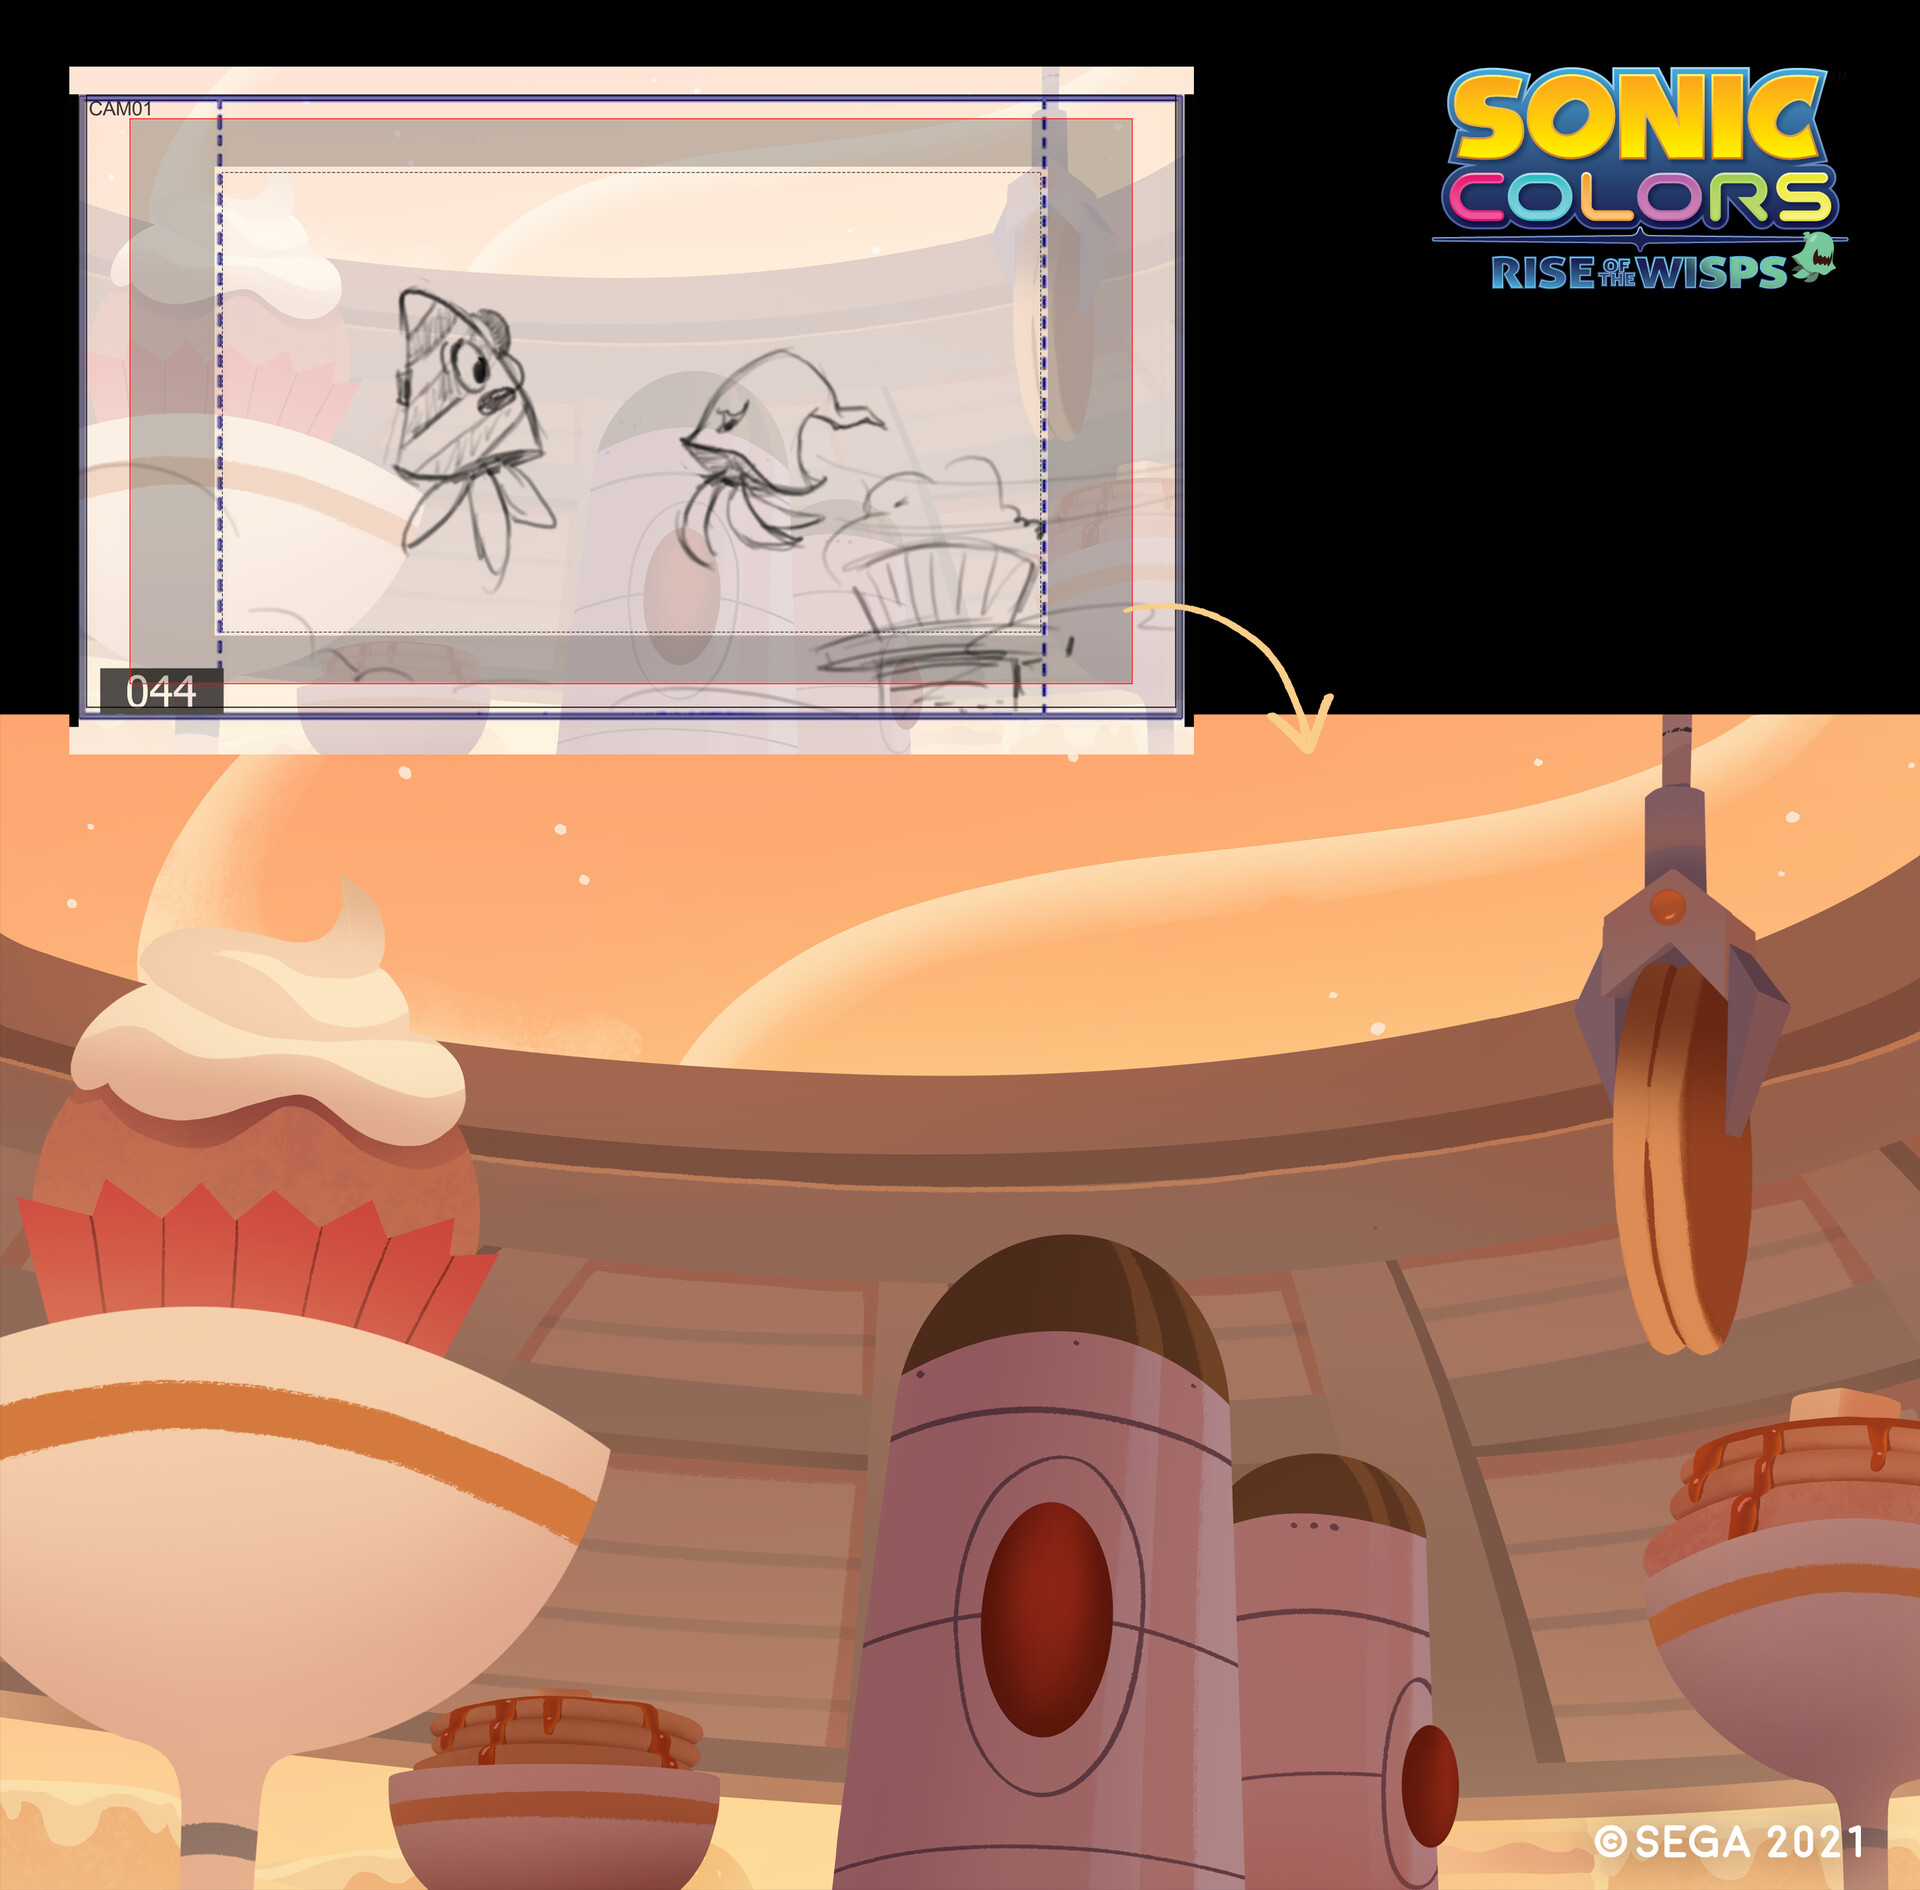 Second Part of Sonic Colors: Rise of the Wisps Animated Short